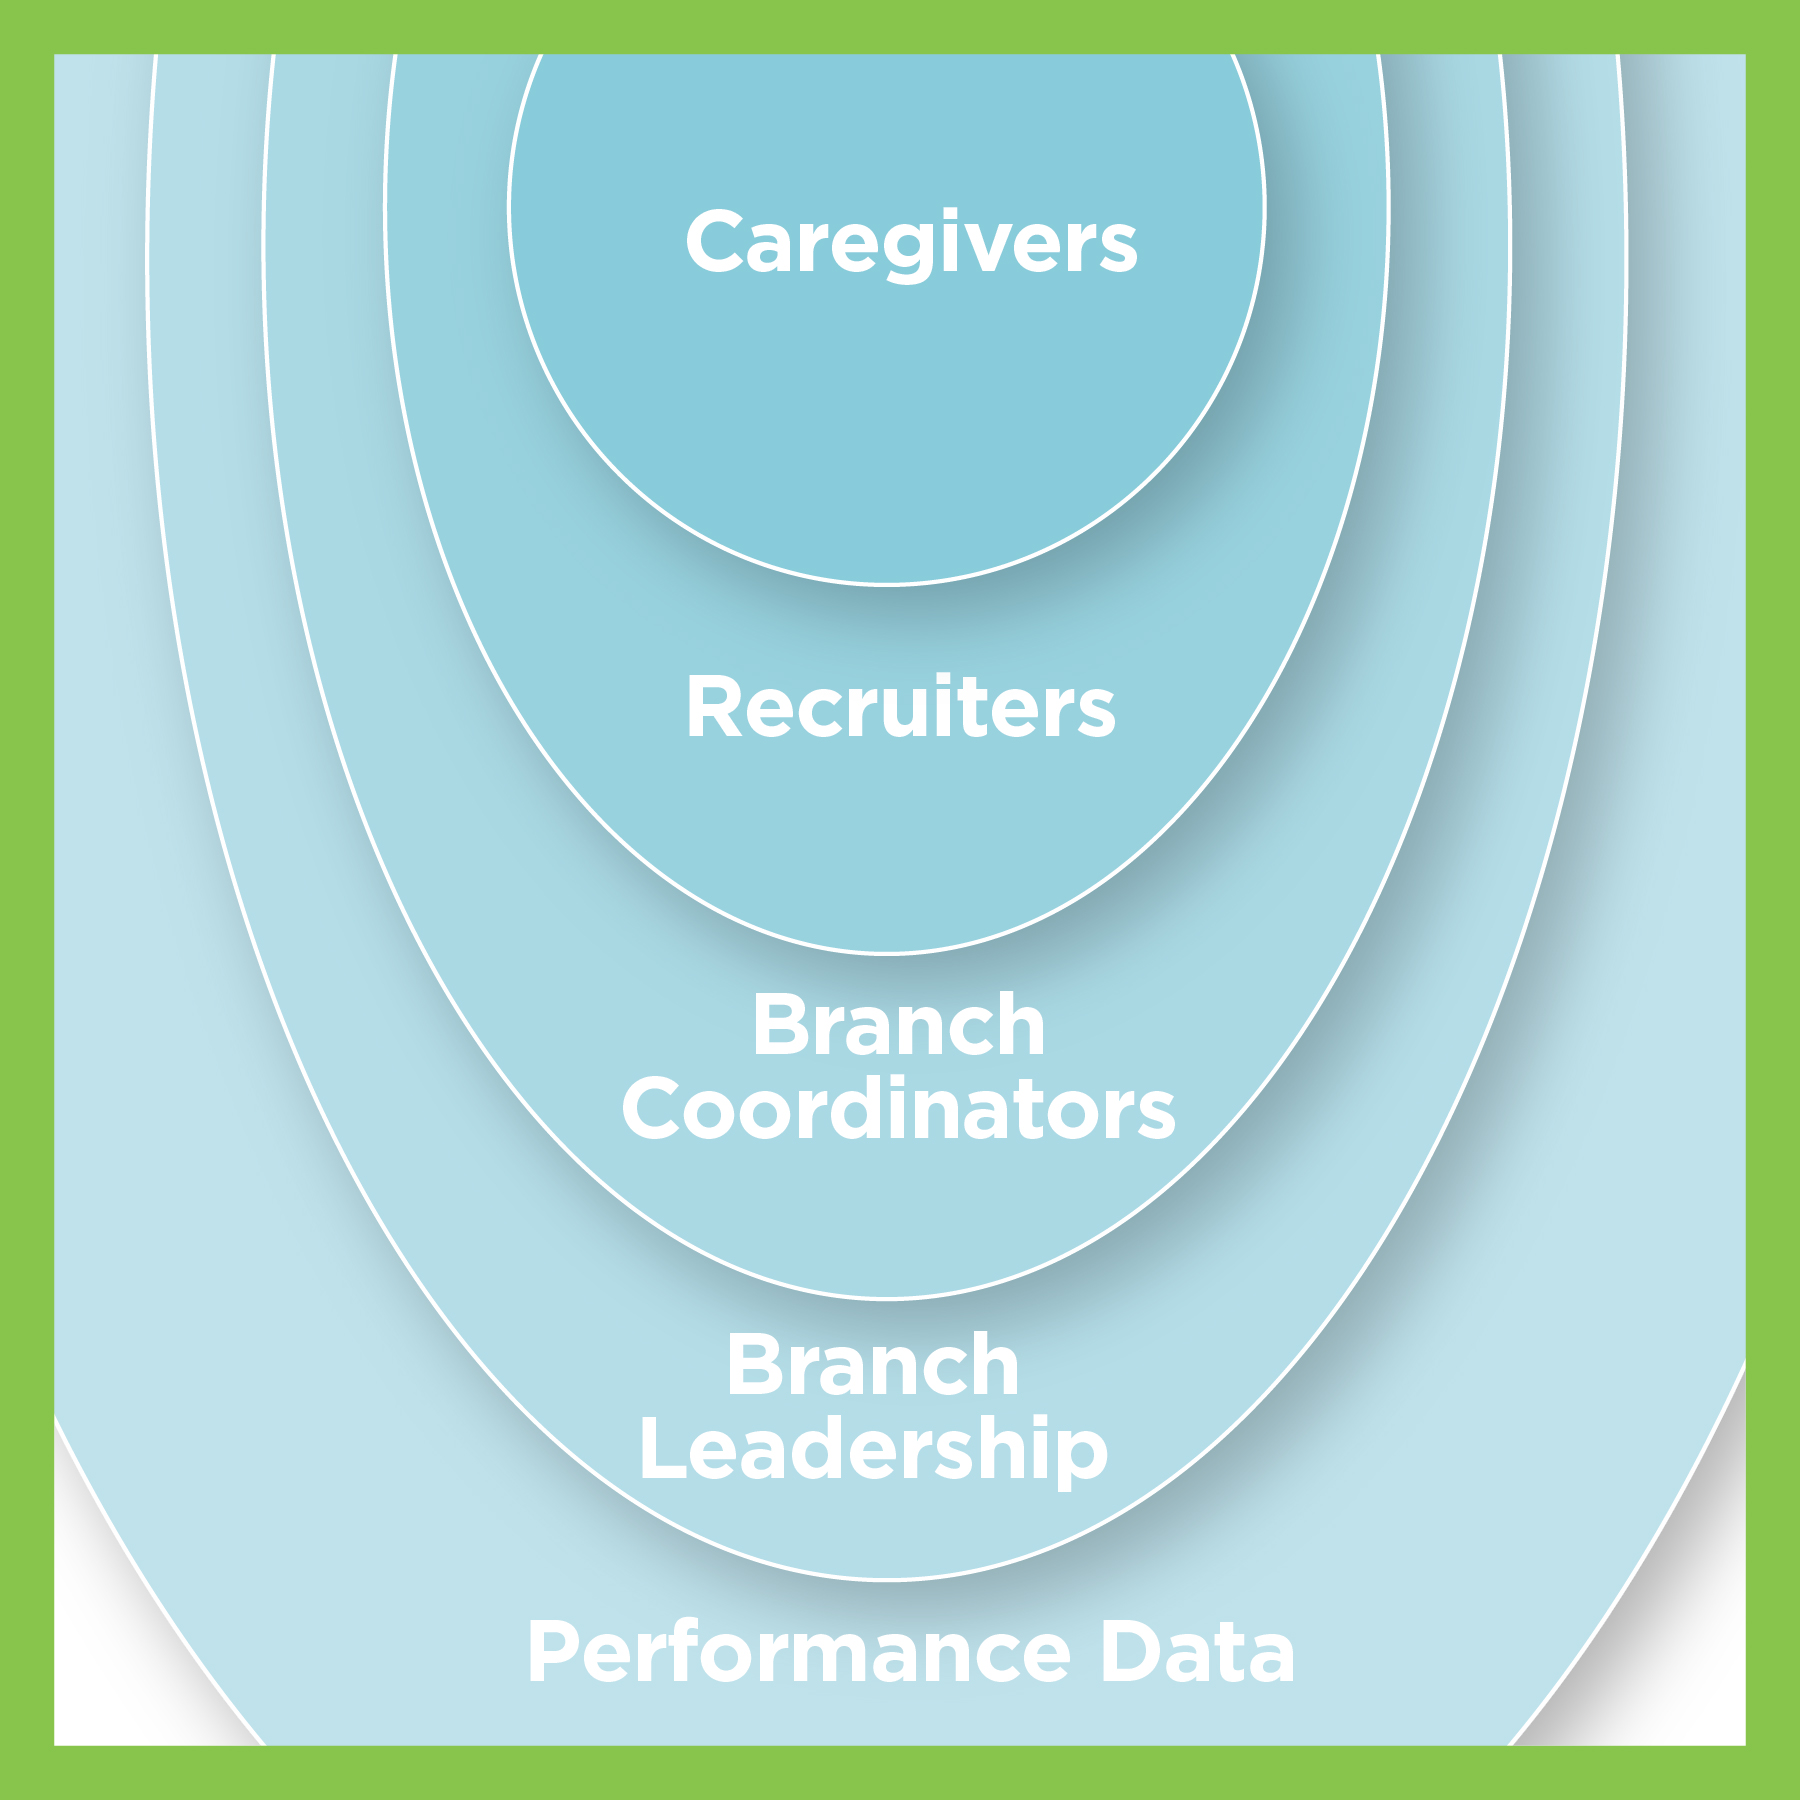 Graphic of concentric circles - caregivers at the center, recruiters, branch coordinators, branch leadership and performance data on the outmost circle